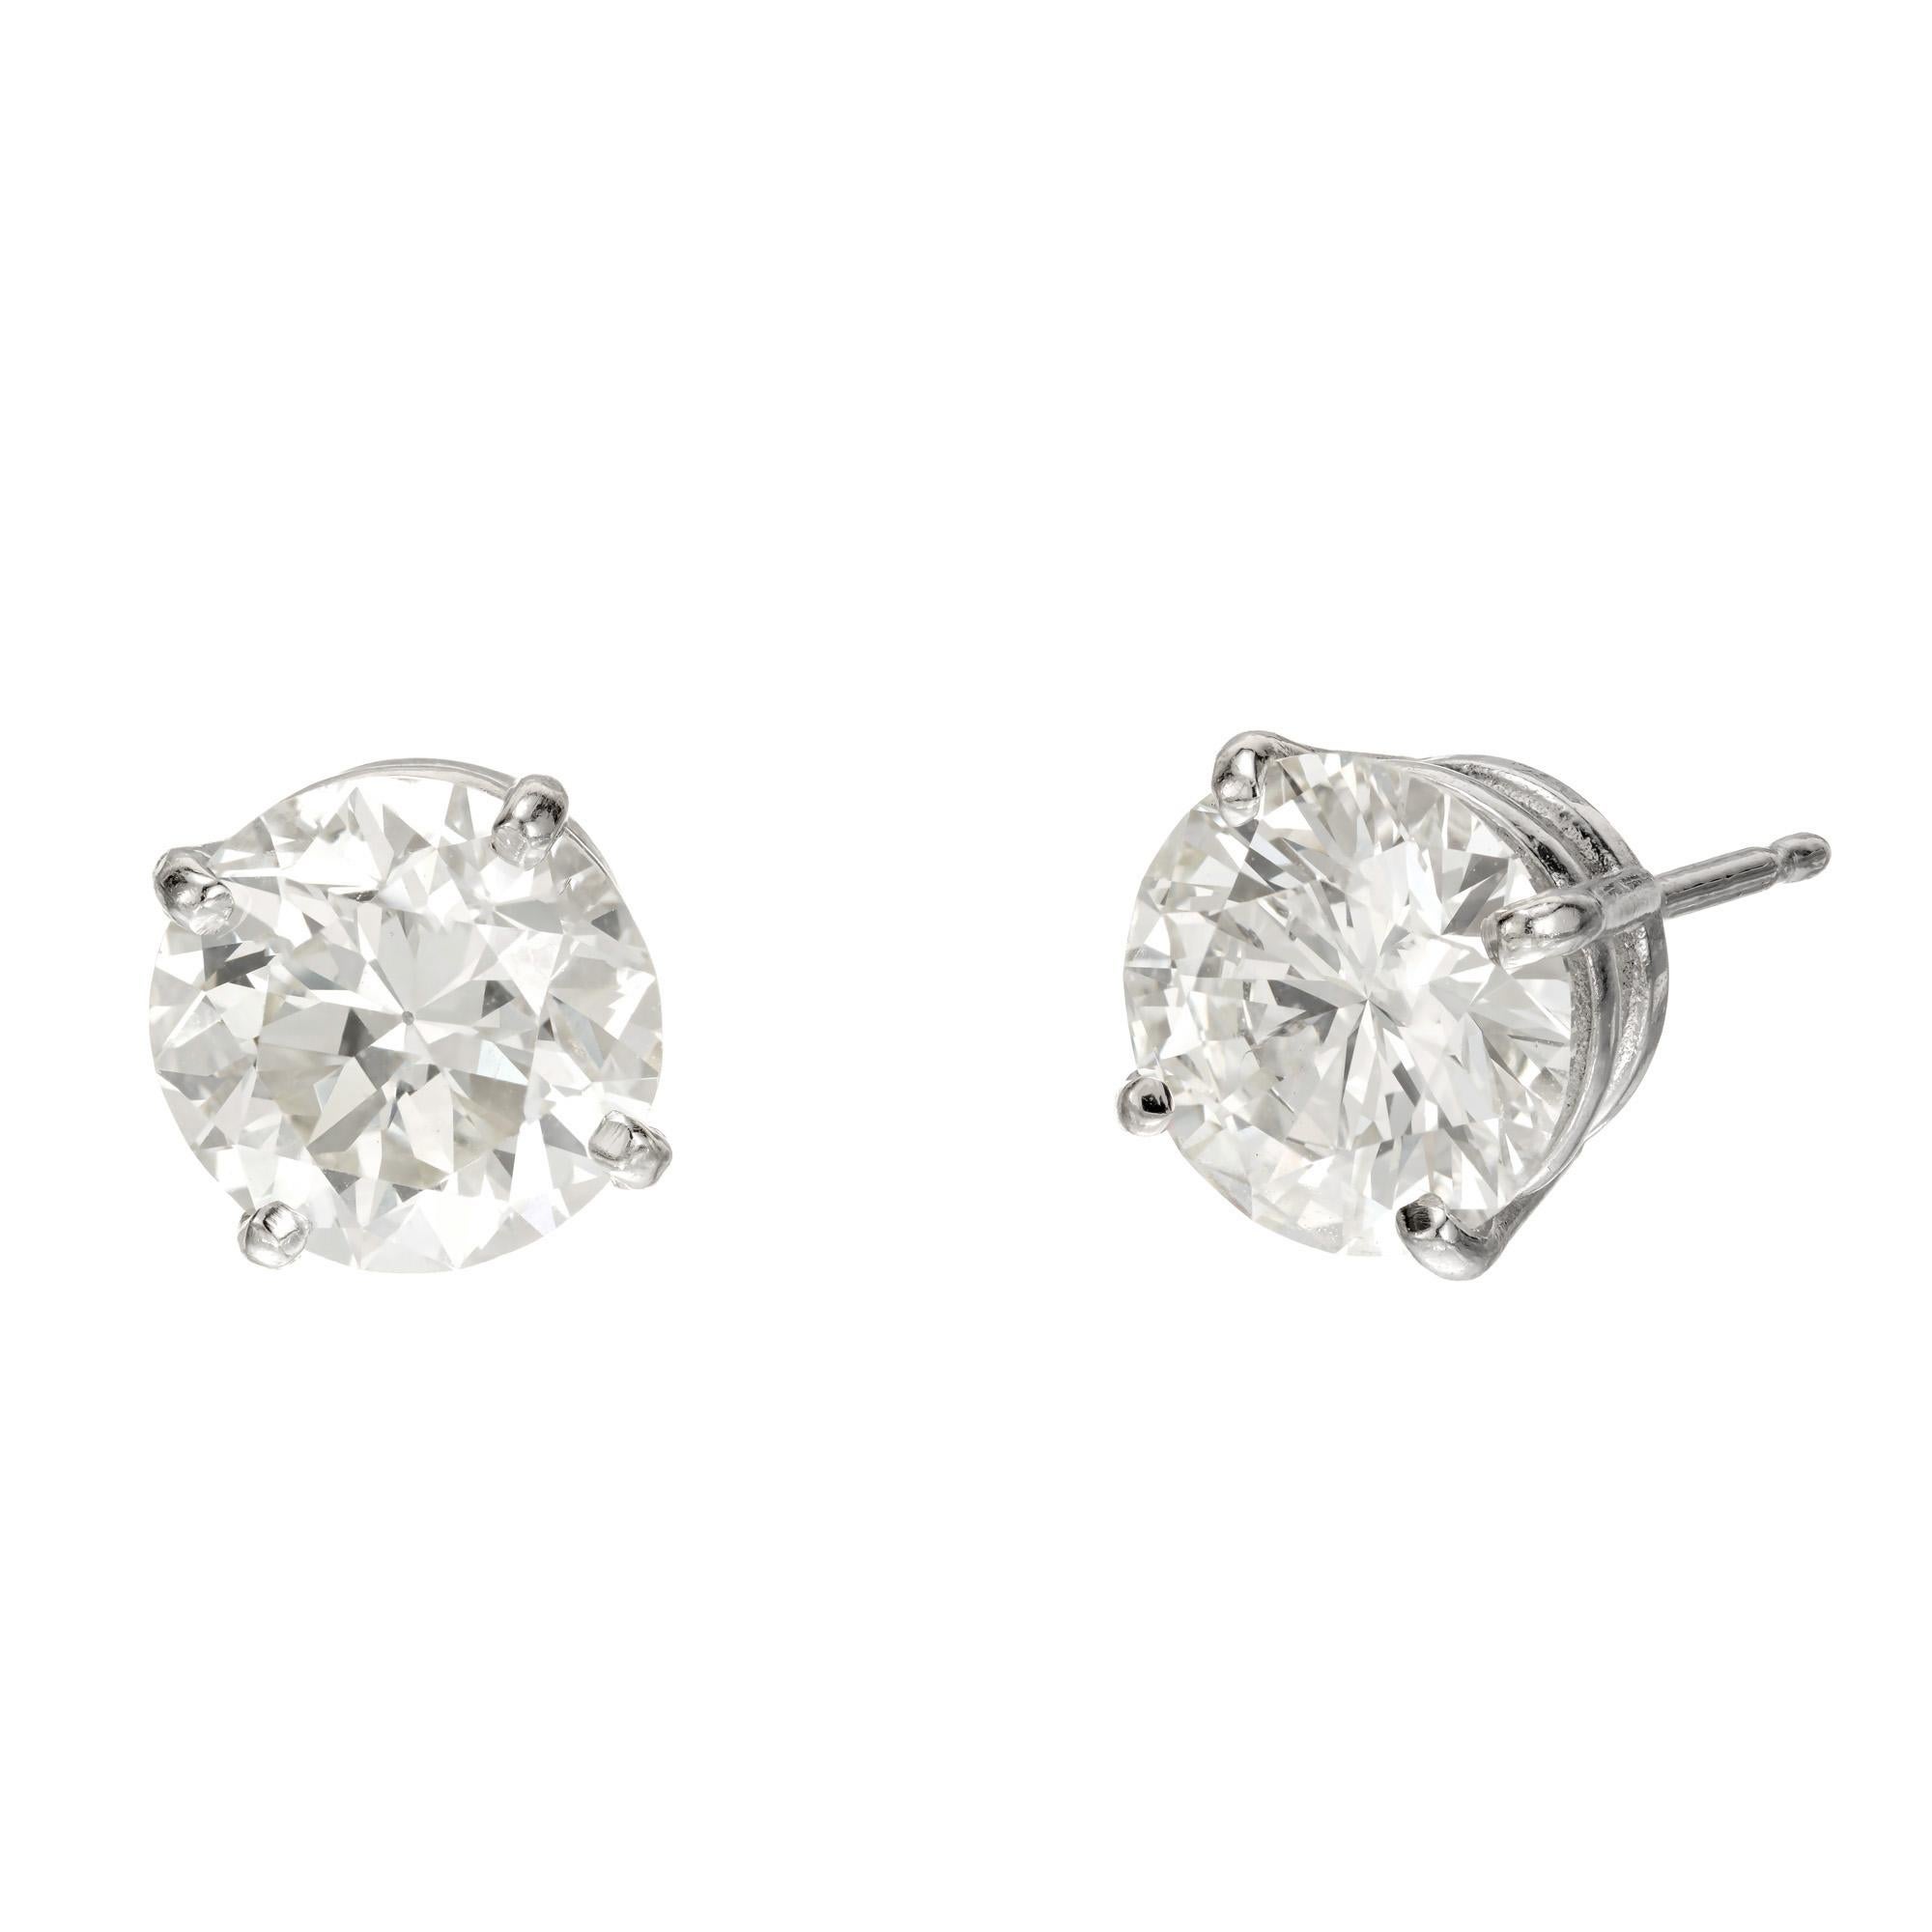 Well matched transitional cut diamond stud earrings. 2 GIA certified round cut diamonds, 1.77cts and 1.58cts set in 4 prong platinum basket settings.  circa 1945-1955 

1 round diamond, L VS approx. 1.77cts GIA Certificate # 5211643397
1 round